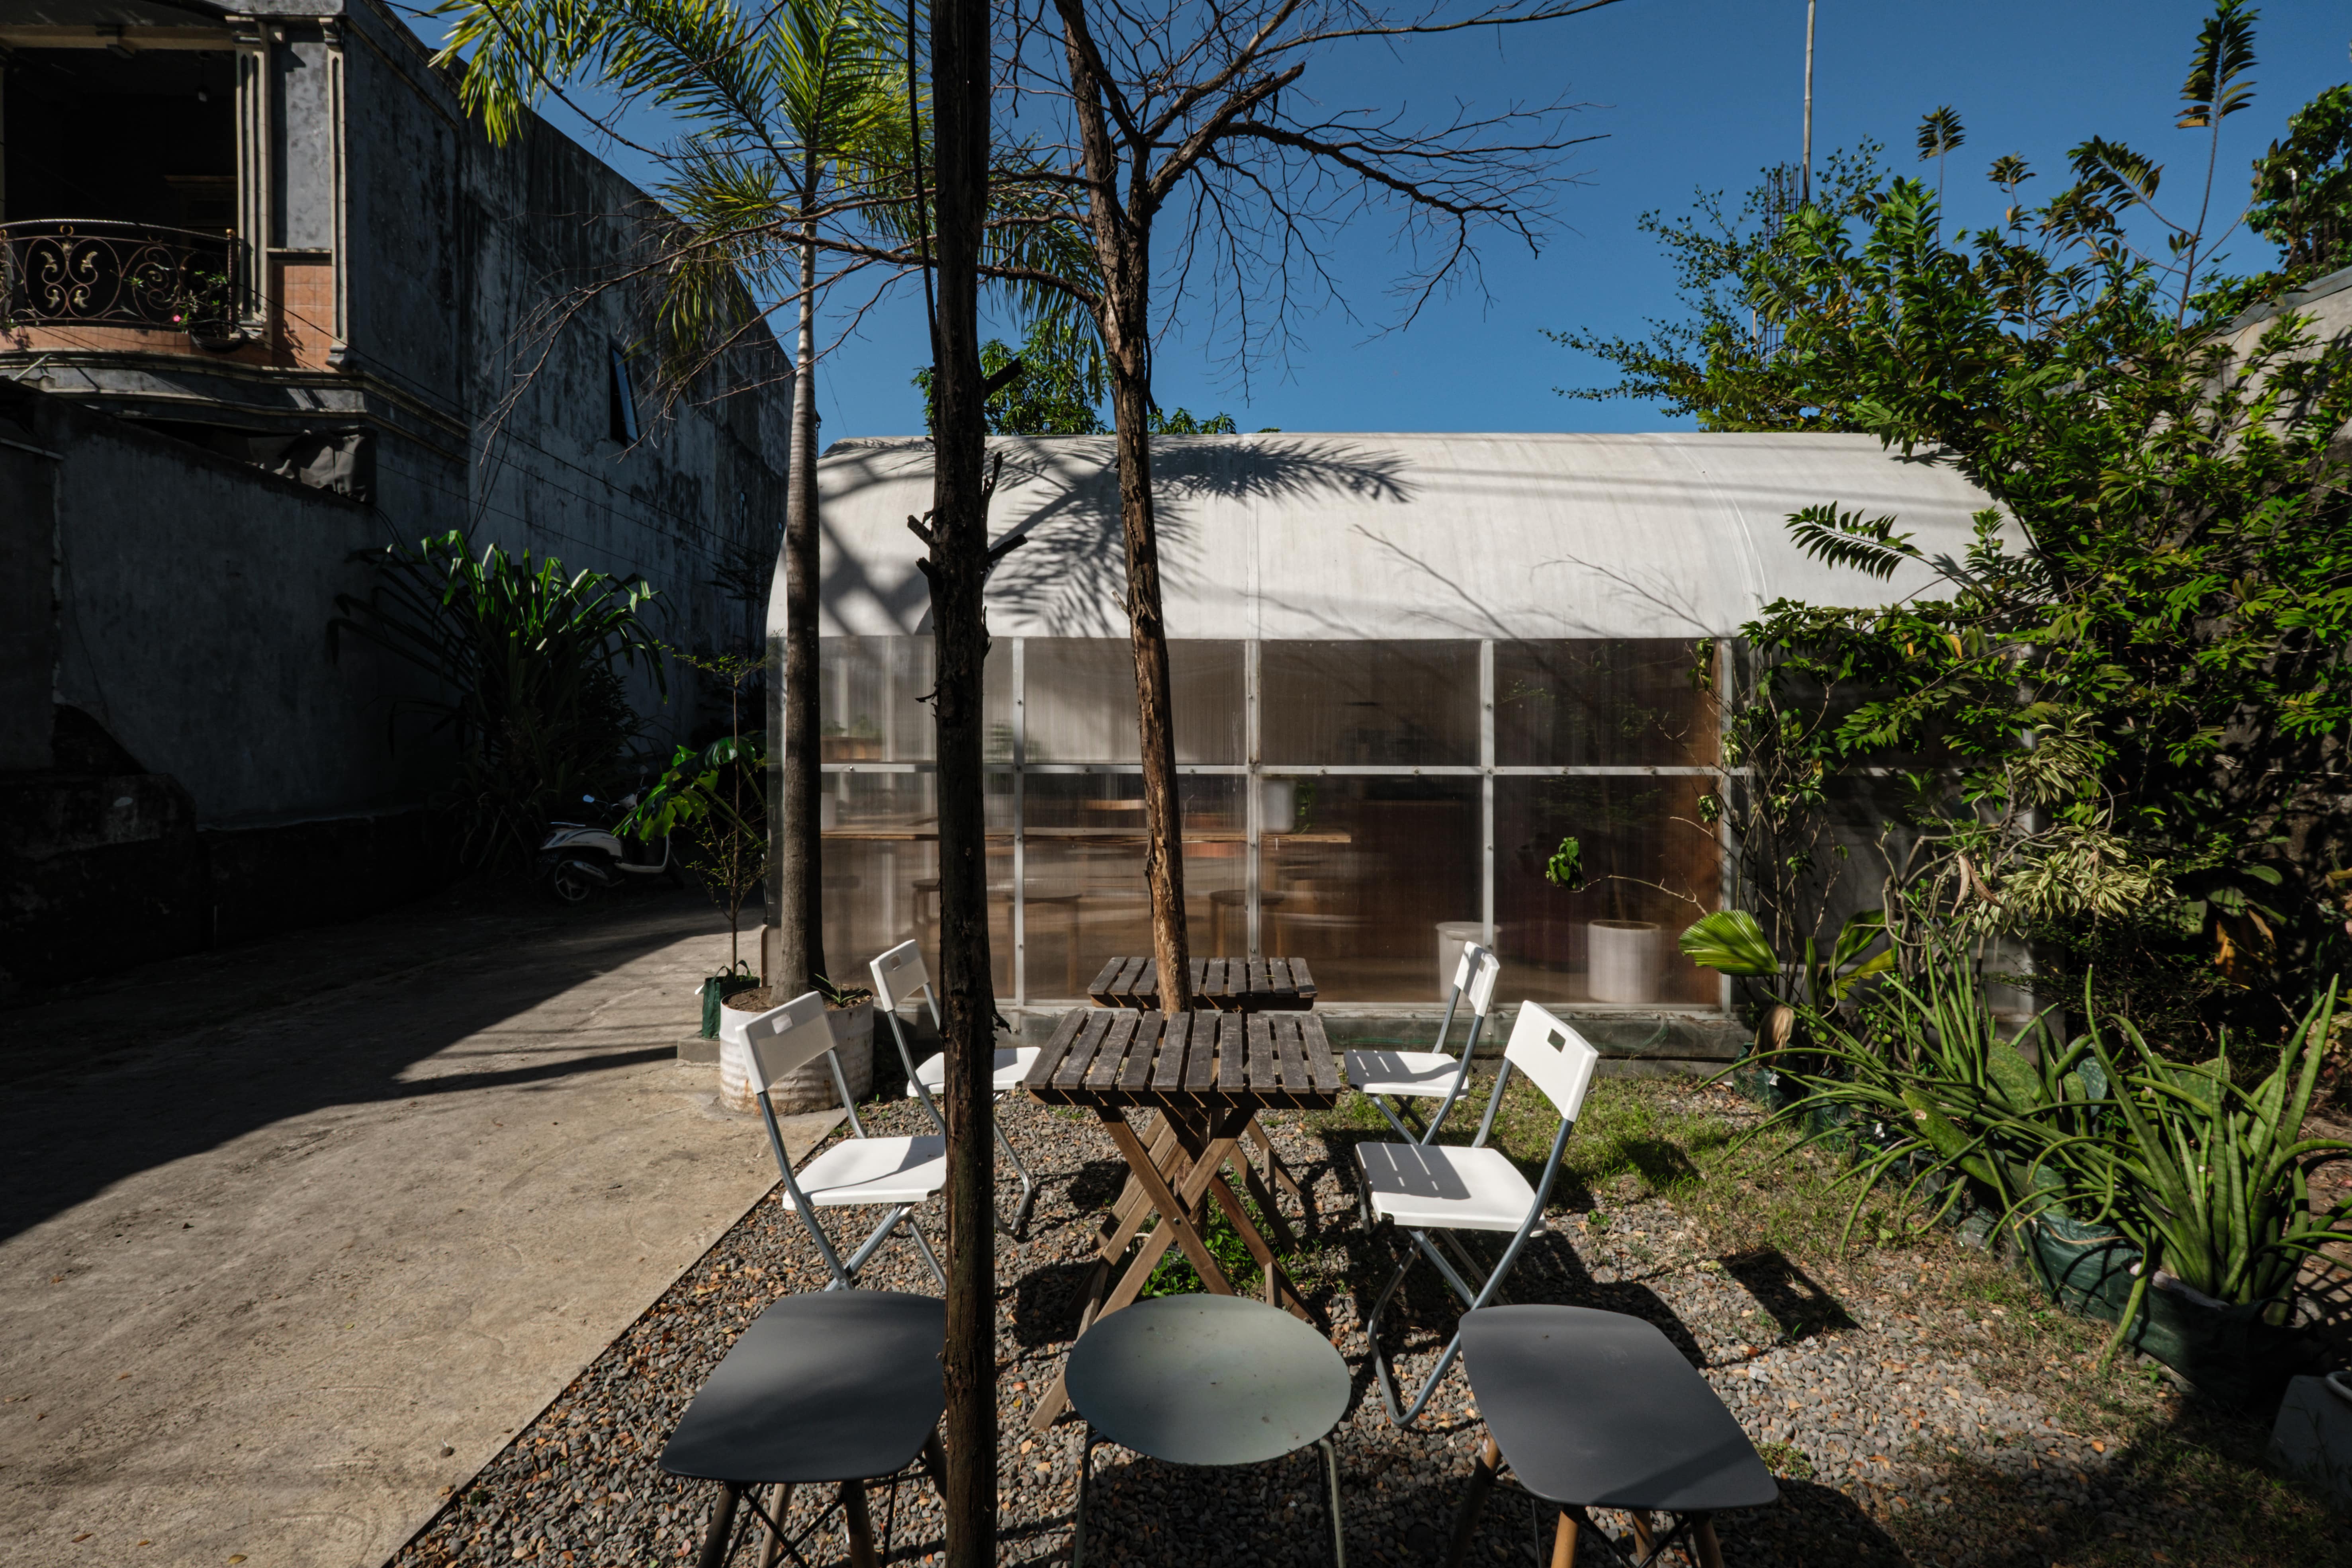 The Productive Home Yard, Lovely Space For MKO Culture Café 